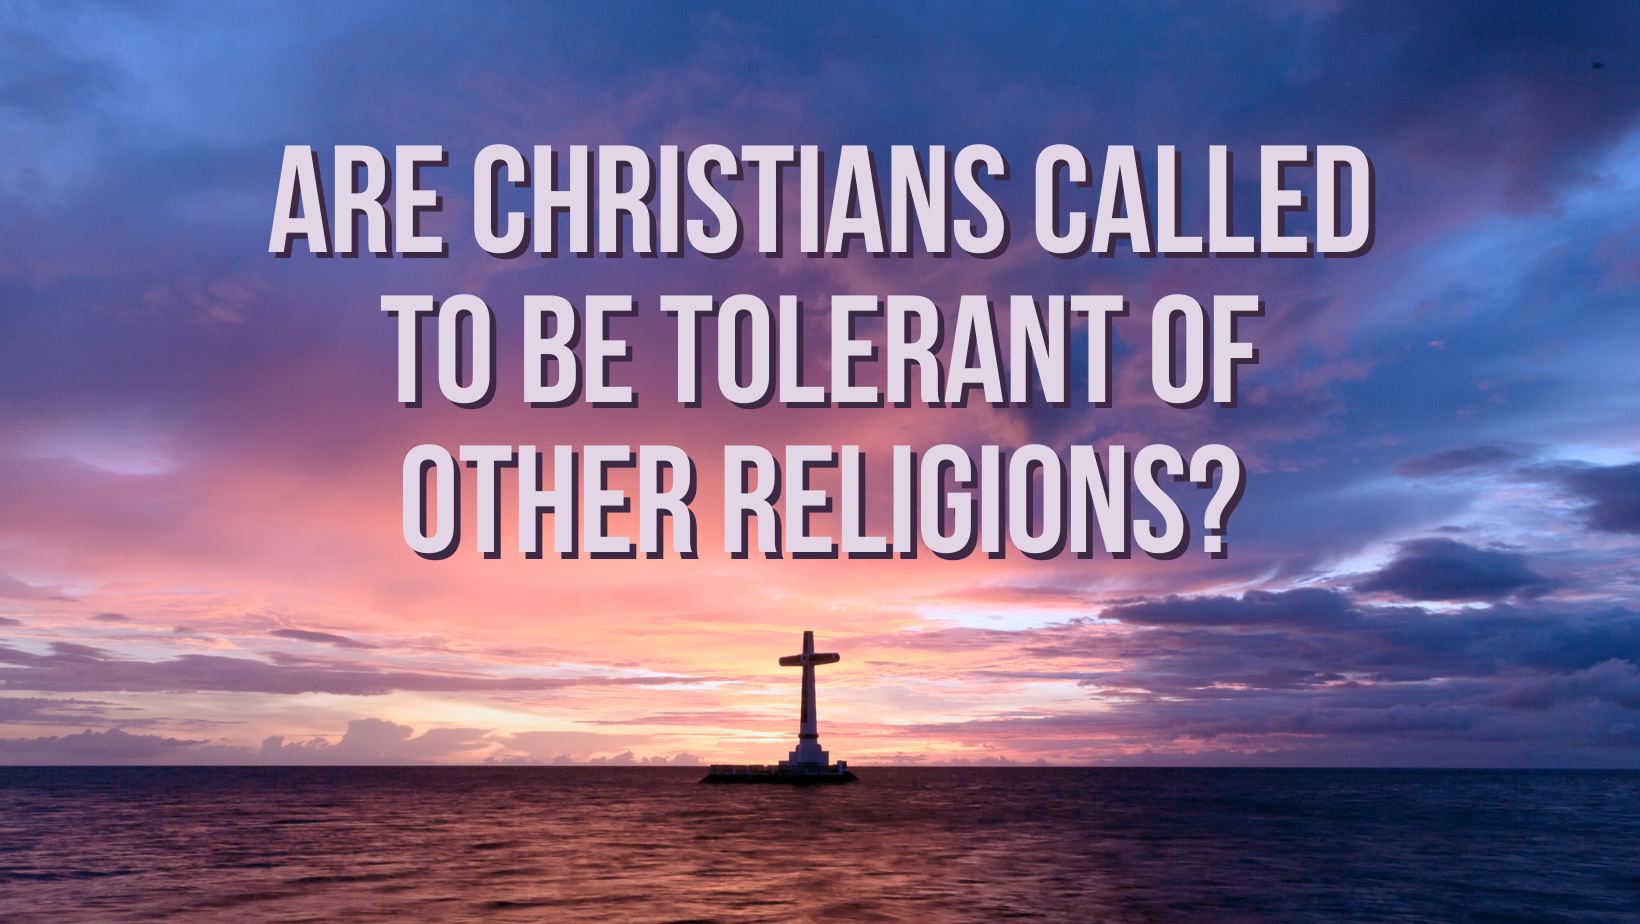 Are Christians called to be tolerant of other religions?